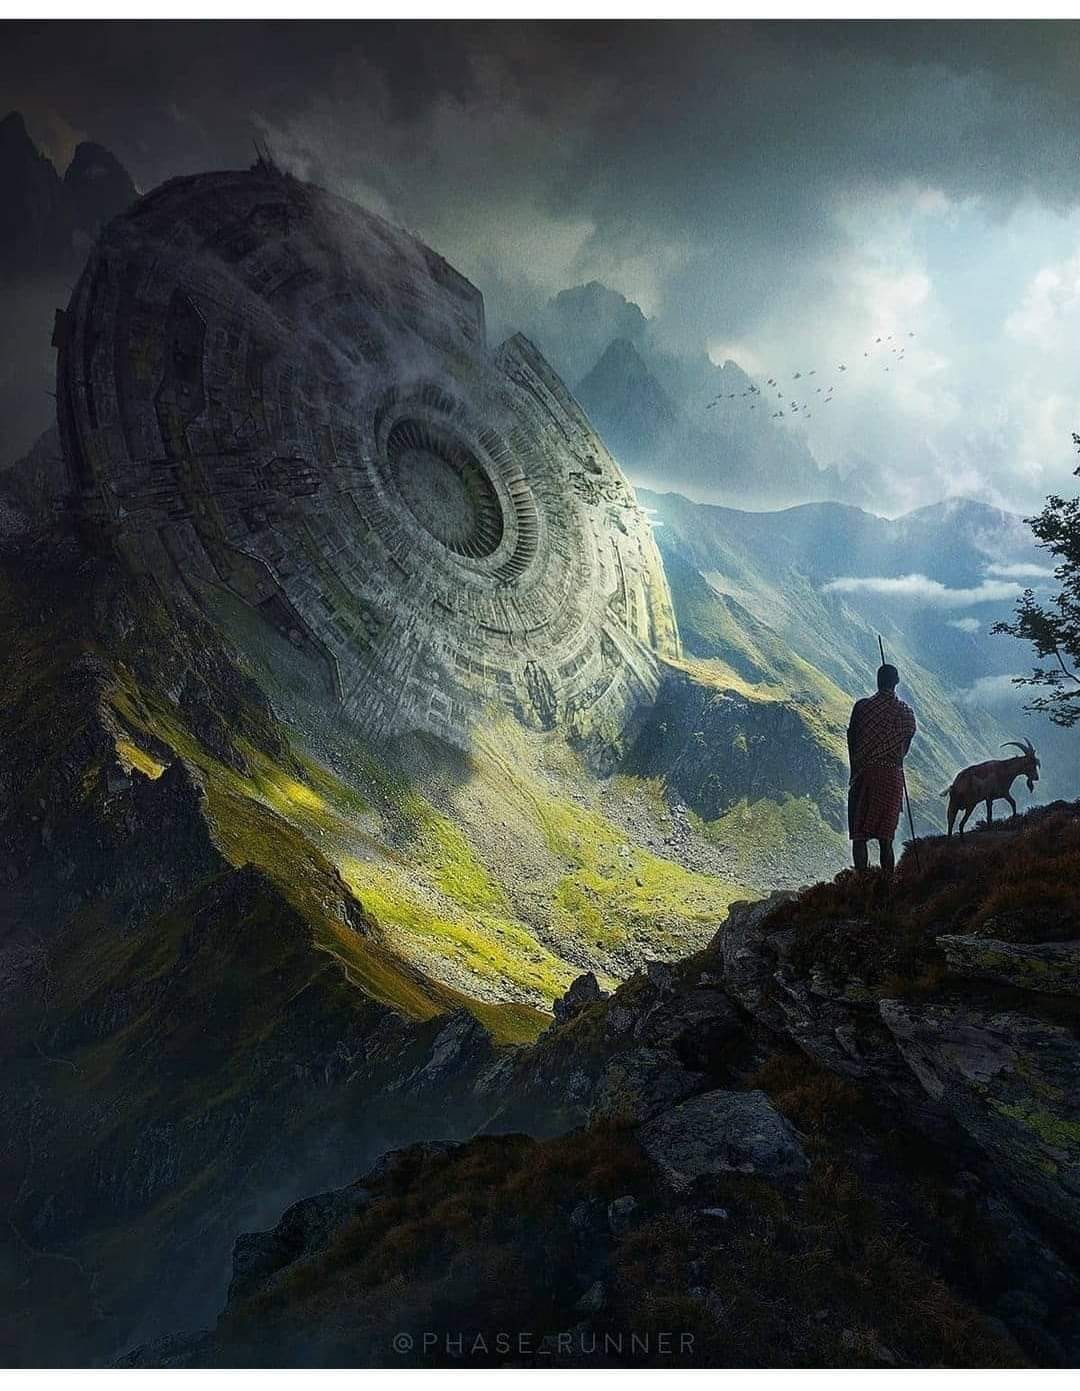 A rustic sci-fi scene. In shadow in the foreground, a rural man and a goat walk along a ridge at the edge of a lush green valley. In it, from mid- to background, a massive disc of an alien spacecraft is nestled into a mountain chain, as if set down and then forgotten. Clouds vary from light to dark. A flock of birds dots the lighter portions. There is a classic elegance to this scene.